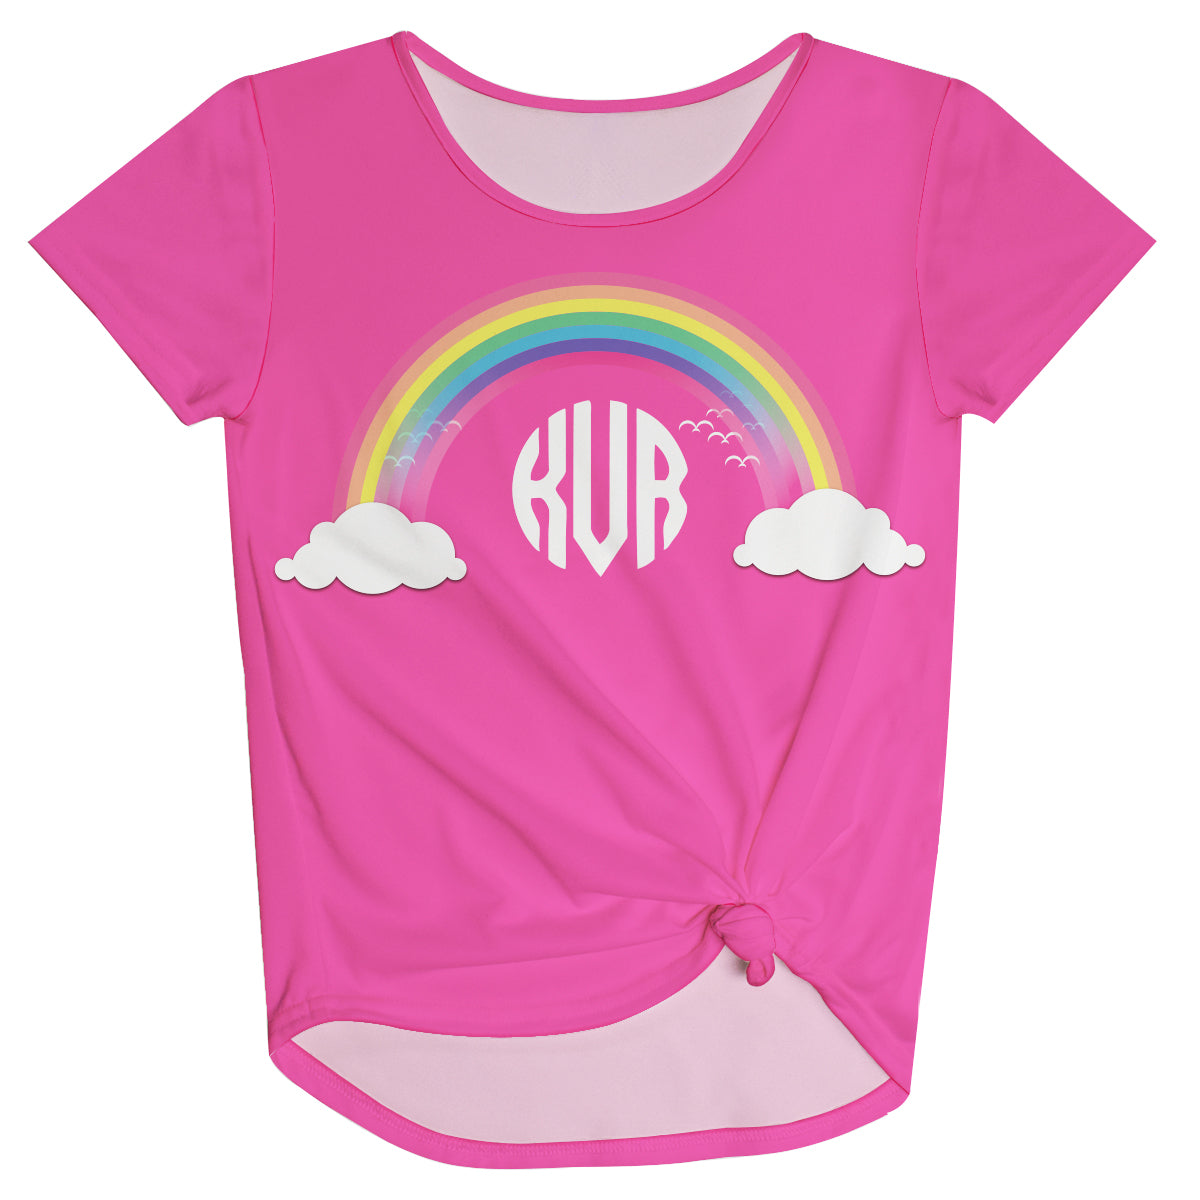 Rainbow Personalized Monogram Pink Knot Top - Wimziy&Co.